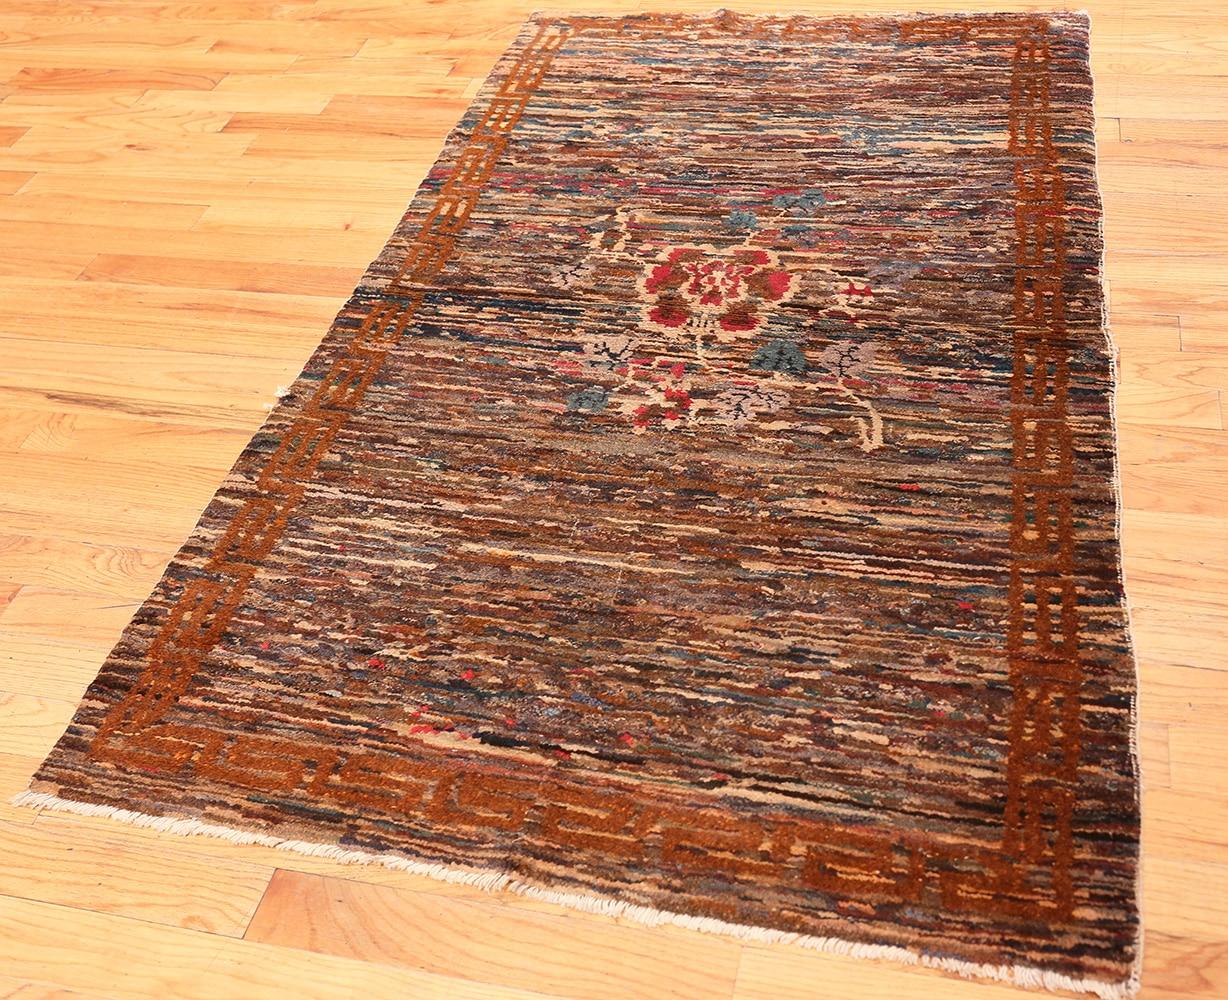 Chinese Chippendale Antique Chinese Rug. Size: 3 ft 11 in x 6 ft 7 in (1.19 m x 2.01 m)